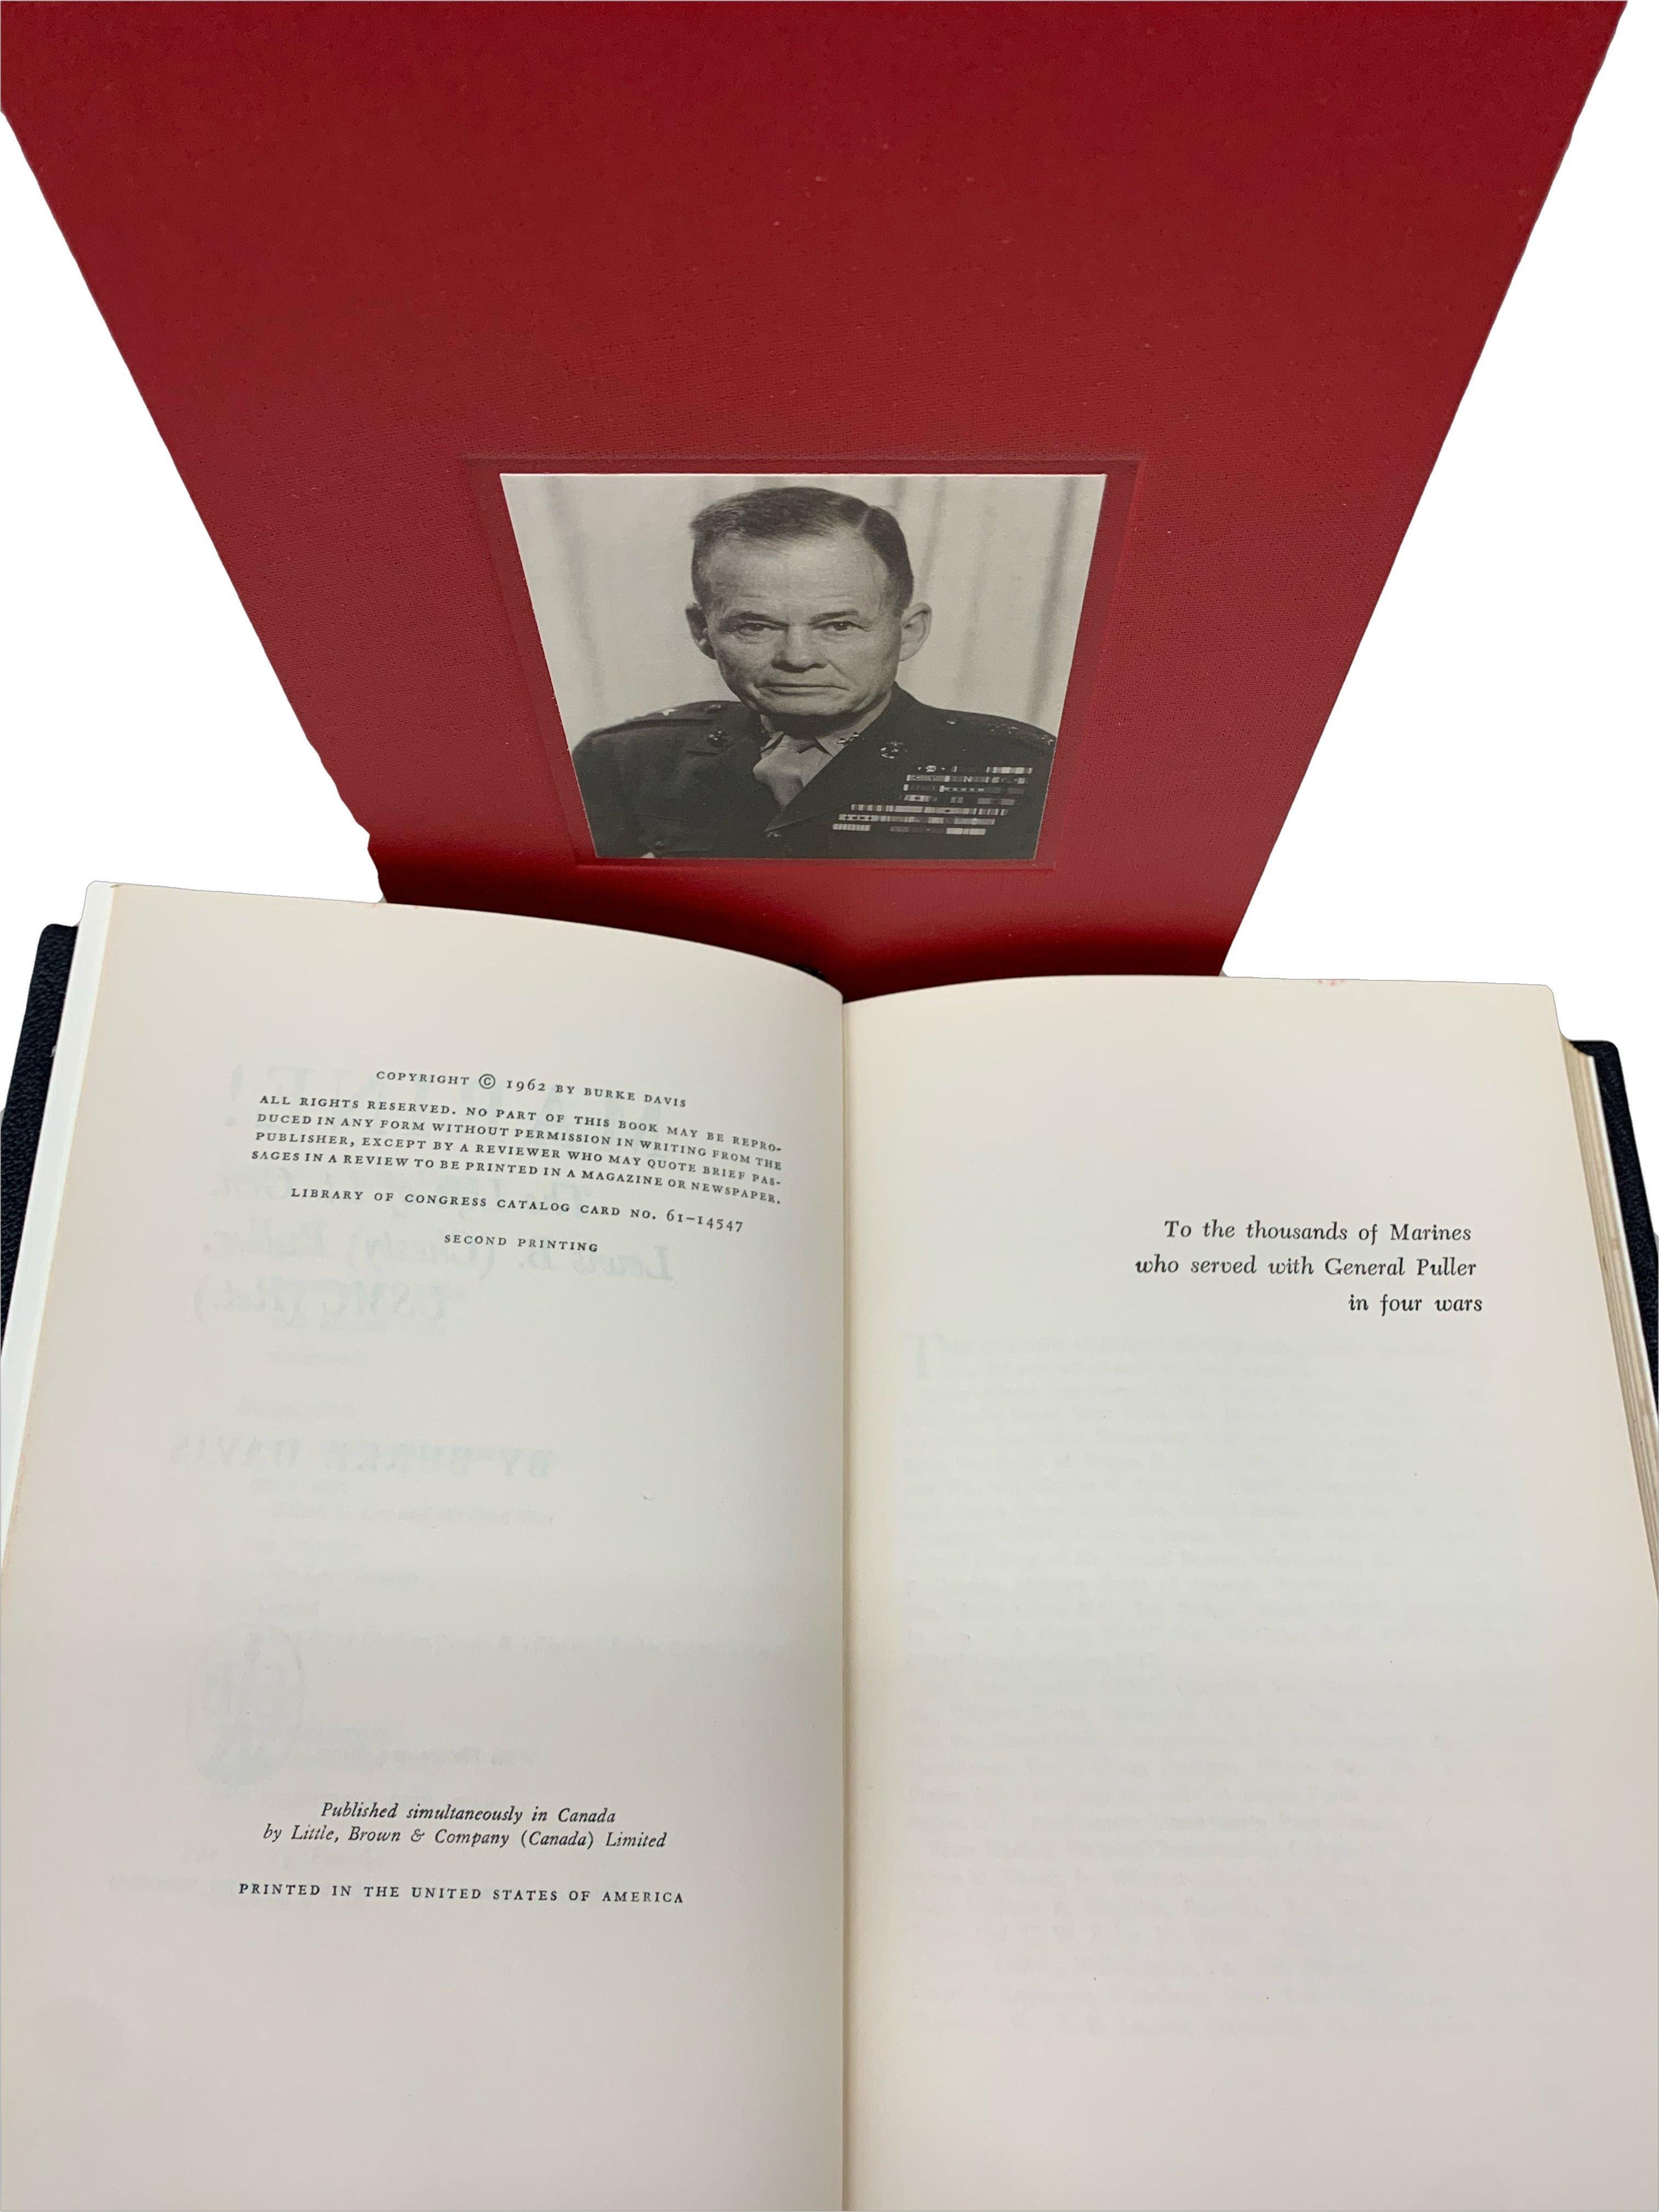 Mid-20th Century Marine! The Life of Chesty Puller by Burke Davis, Signed by Chesty Puller, 1962